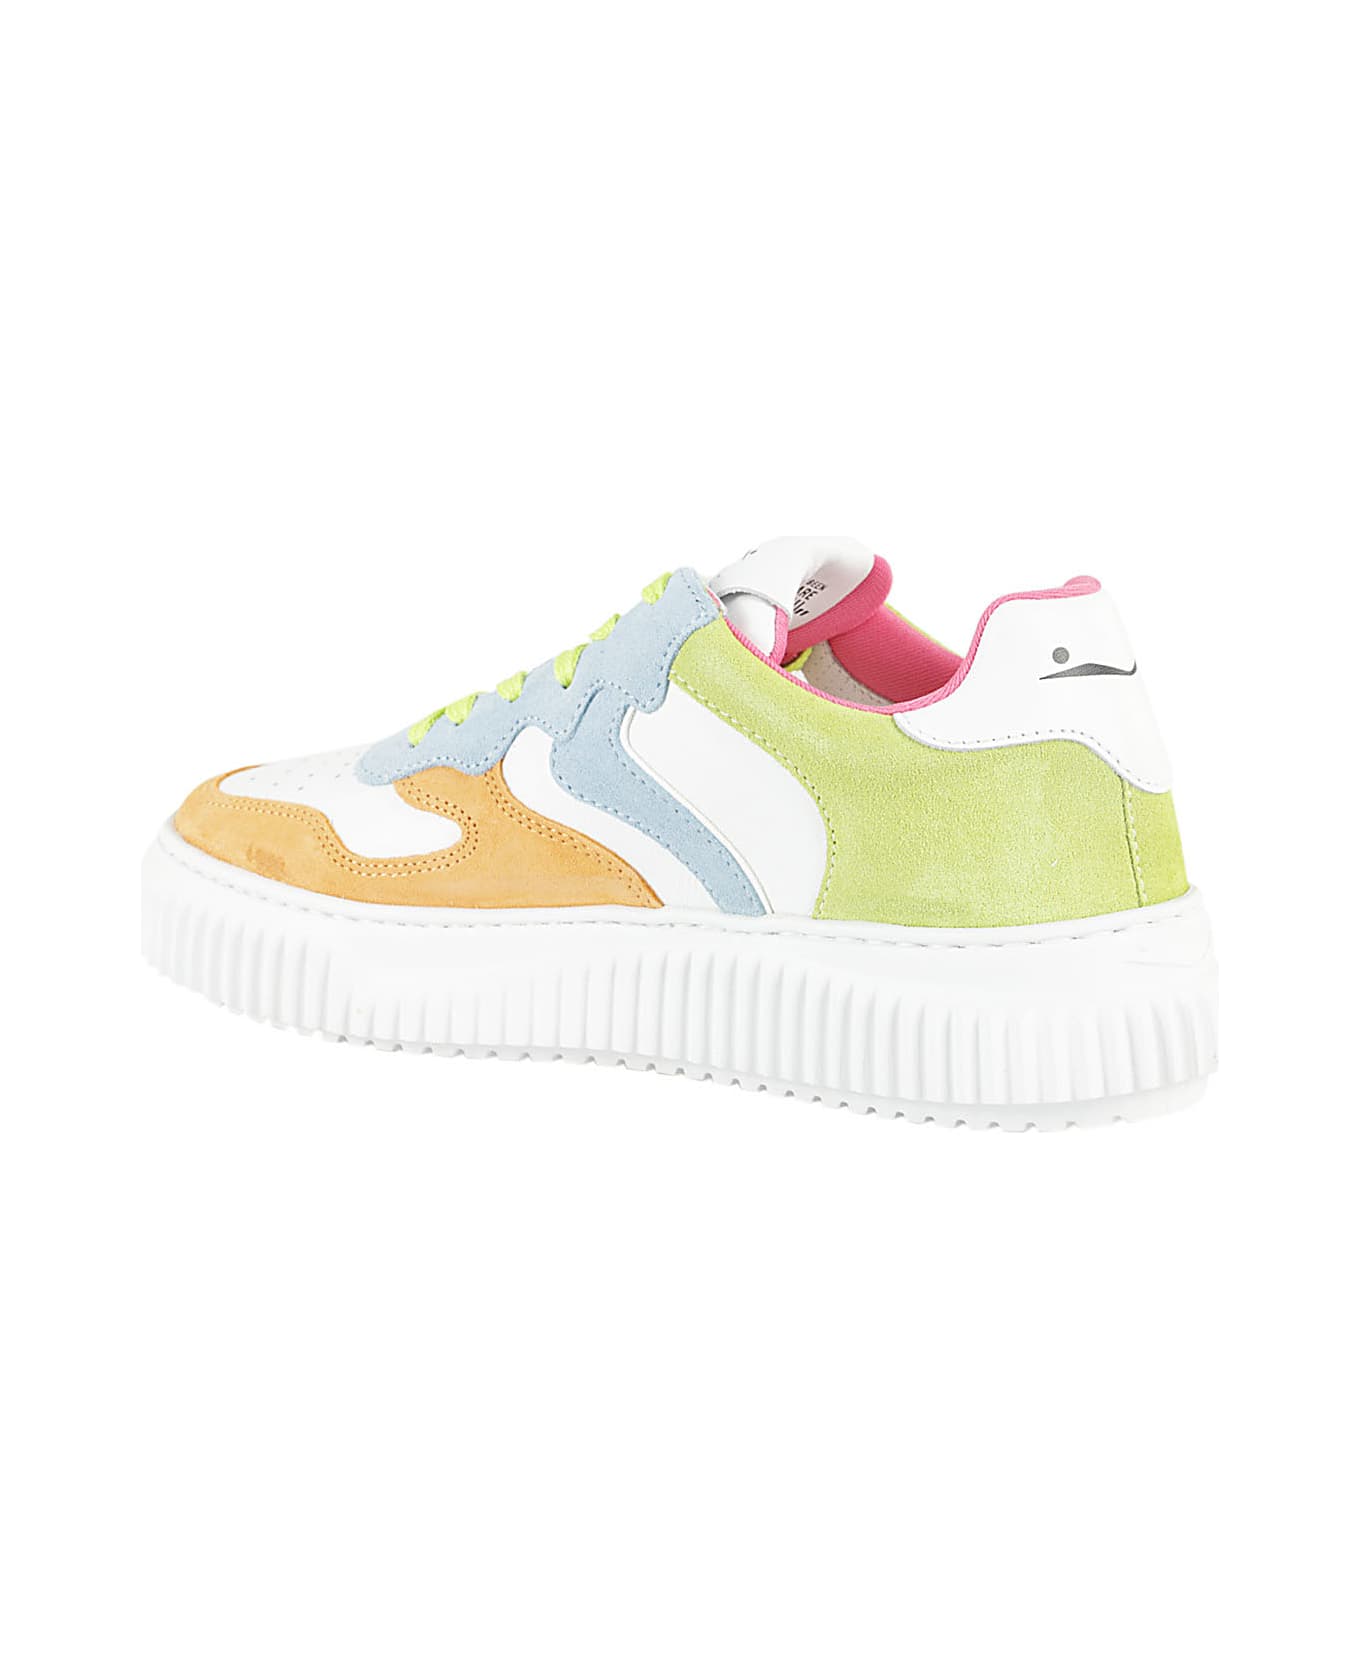 Voile Blanche Laura Suede - Peach Sky Blue Lime